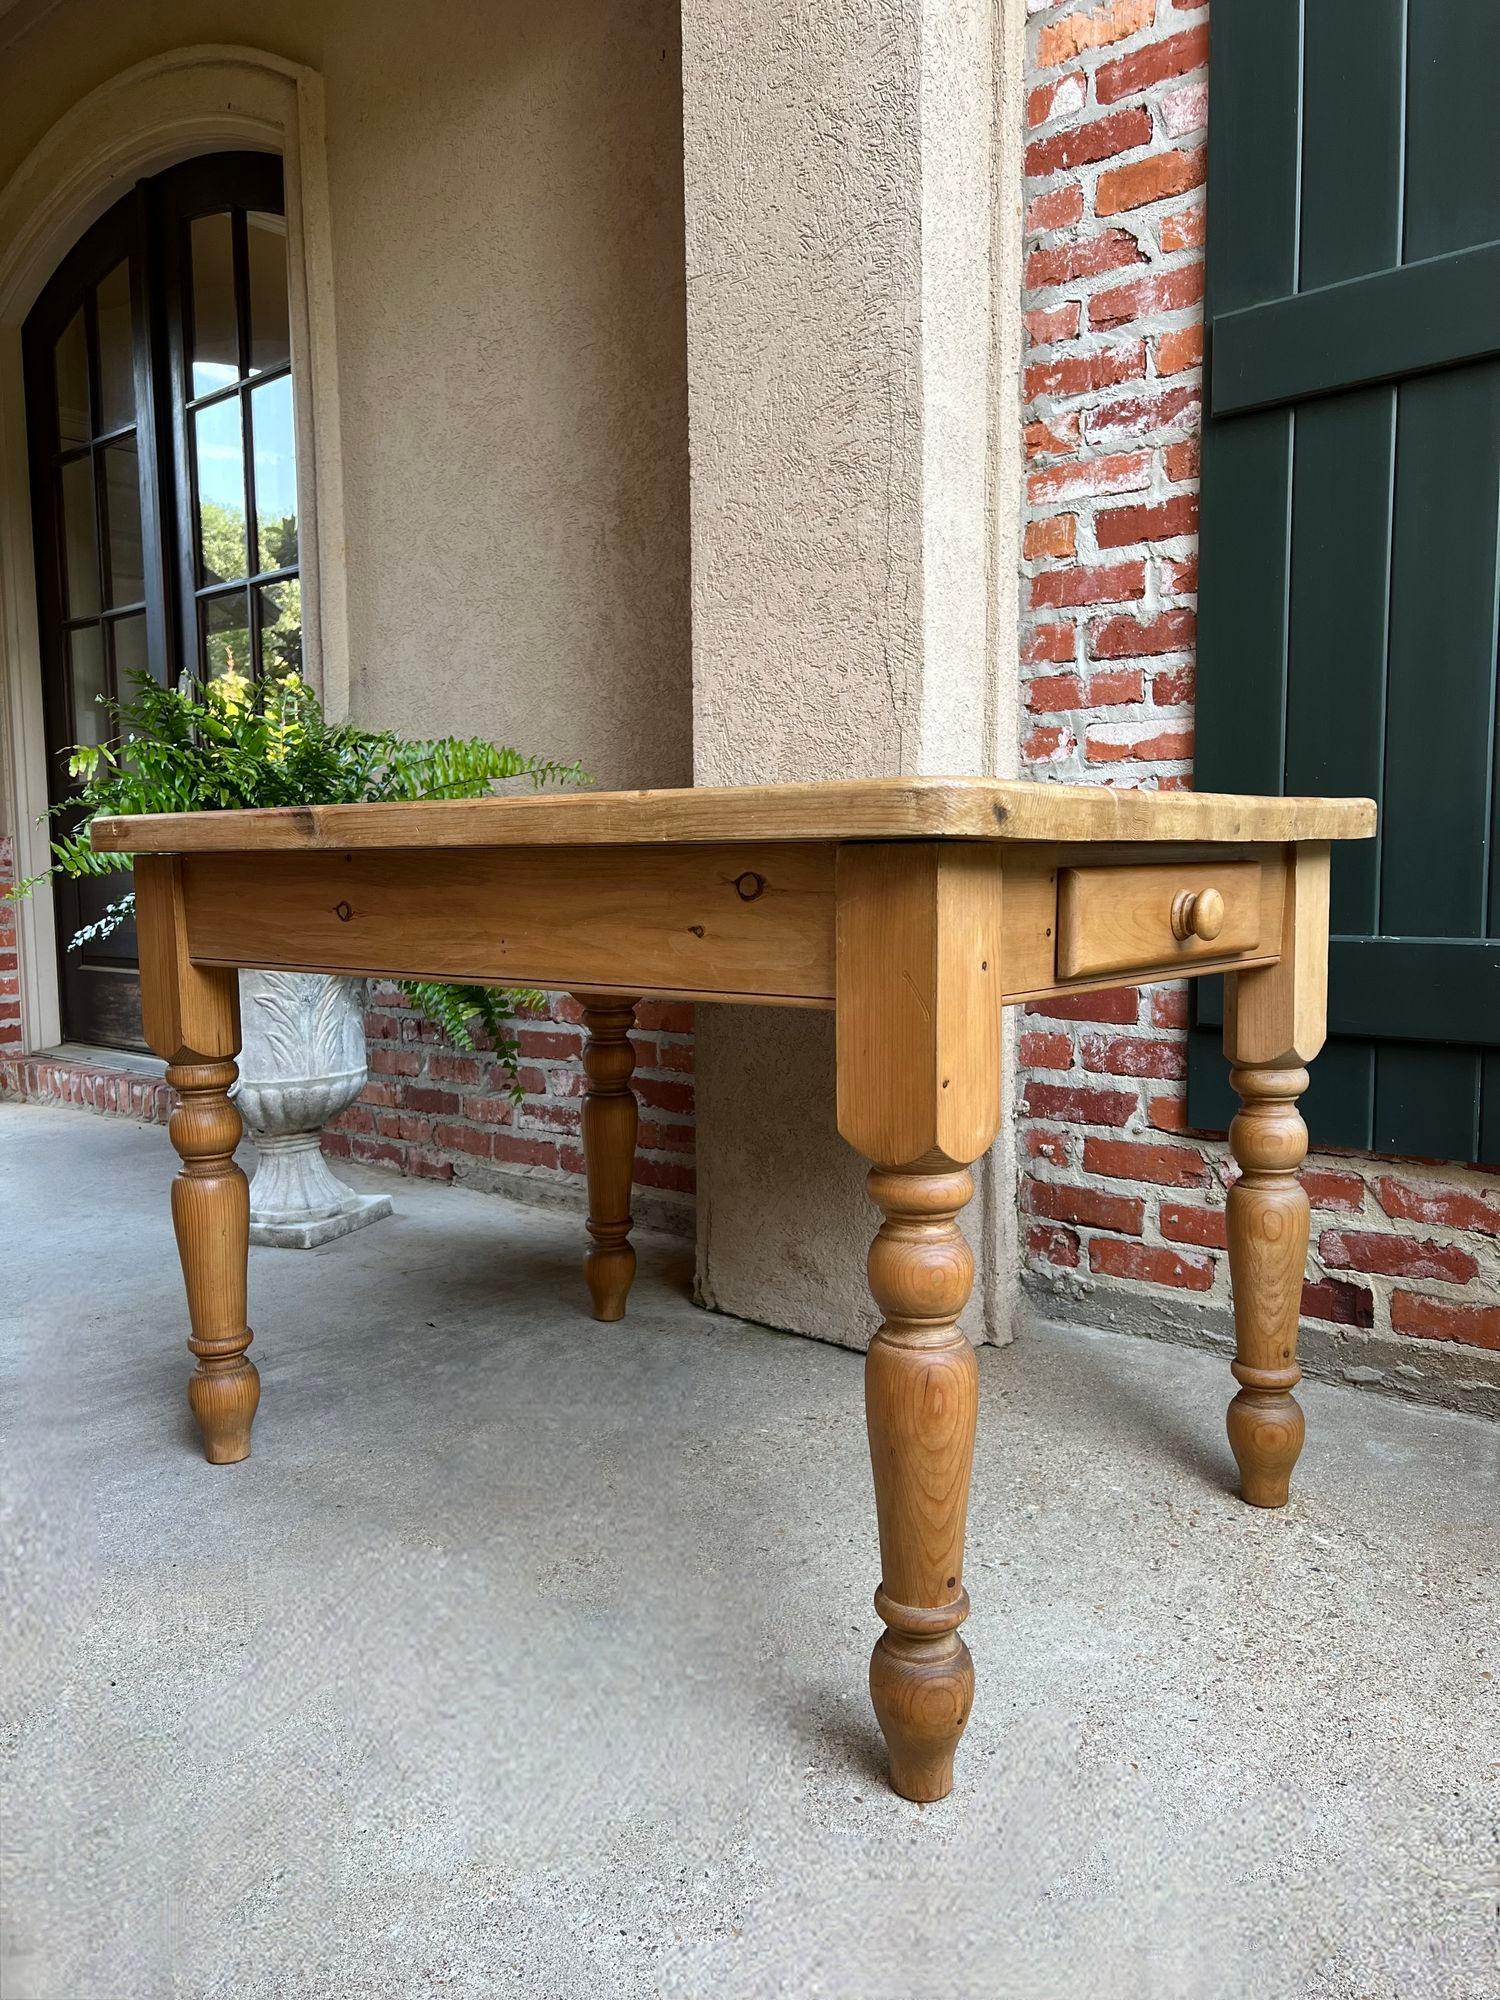 Vintage English Pine Farm Table Kitchen Island Sofa Table Farmhouse Country.

Direct from England, (YES, our English container finally arrived, and we have some amazing English antiques, and of course, lots of barley twist)! This 4 ft. length is a